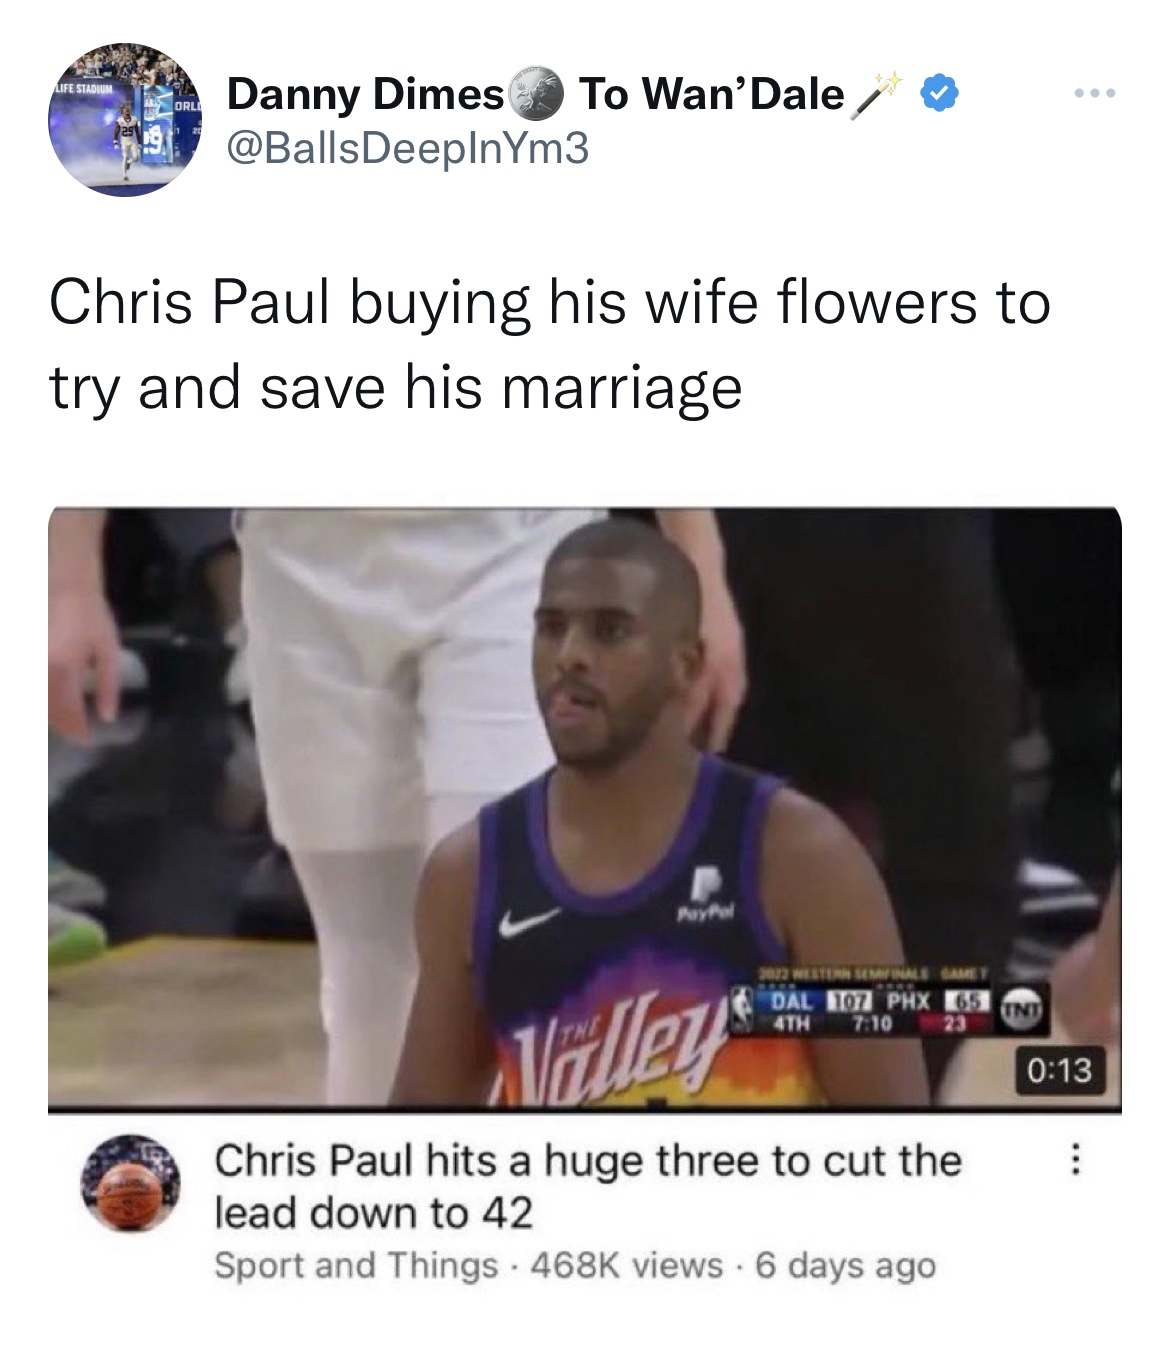 Chris Paul and Kim K memes - photo caption - Life Stadium Orli Danny Dimes To Wan'Dale Chris Paul buying his wife flowers to try and save his marriage 2012 Western Semnale Game Dal 107 Phx 65 4TH Nalley Chris Paul hits a huge three to cut the lead down to